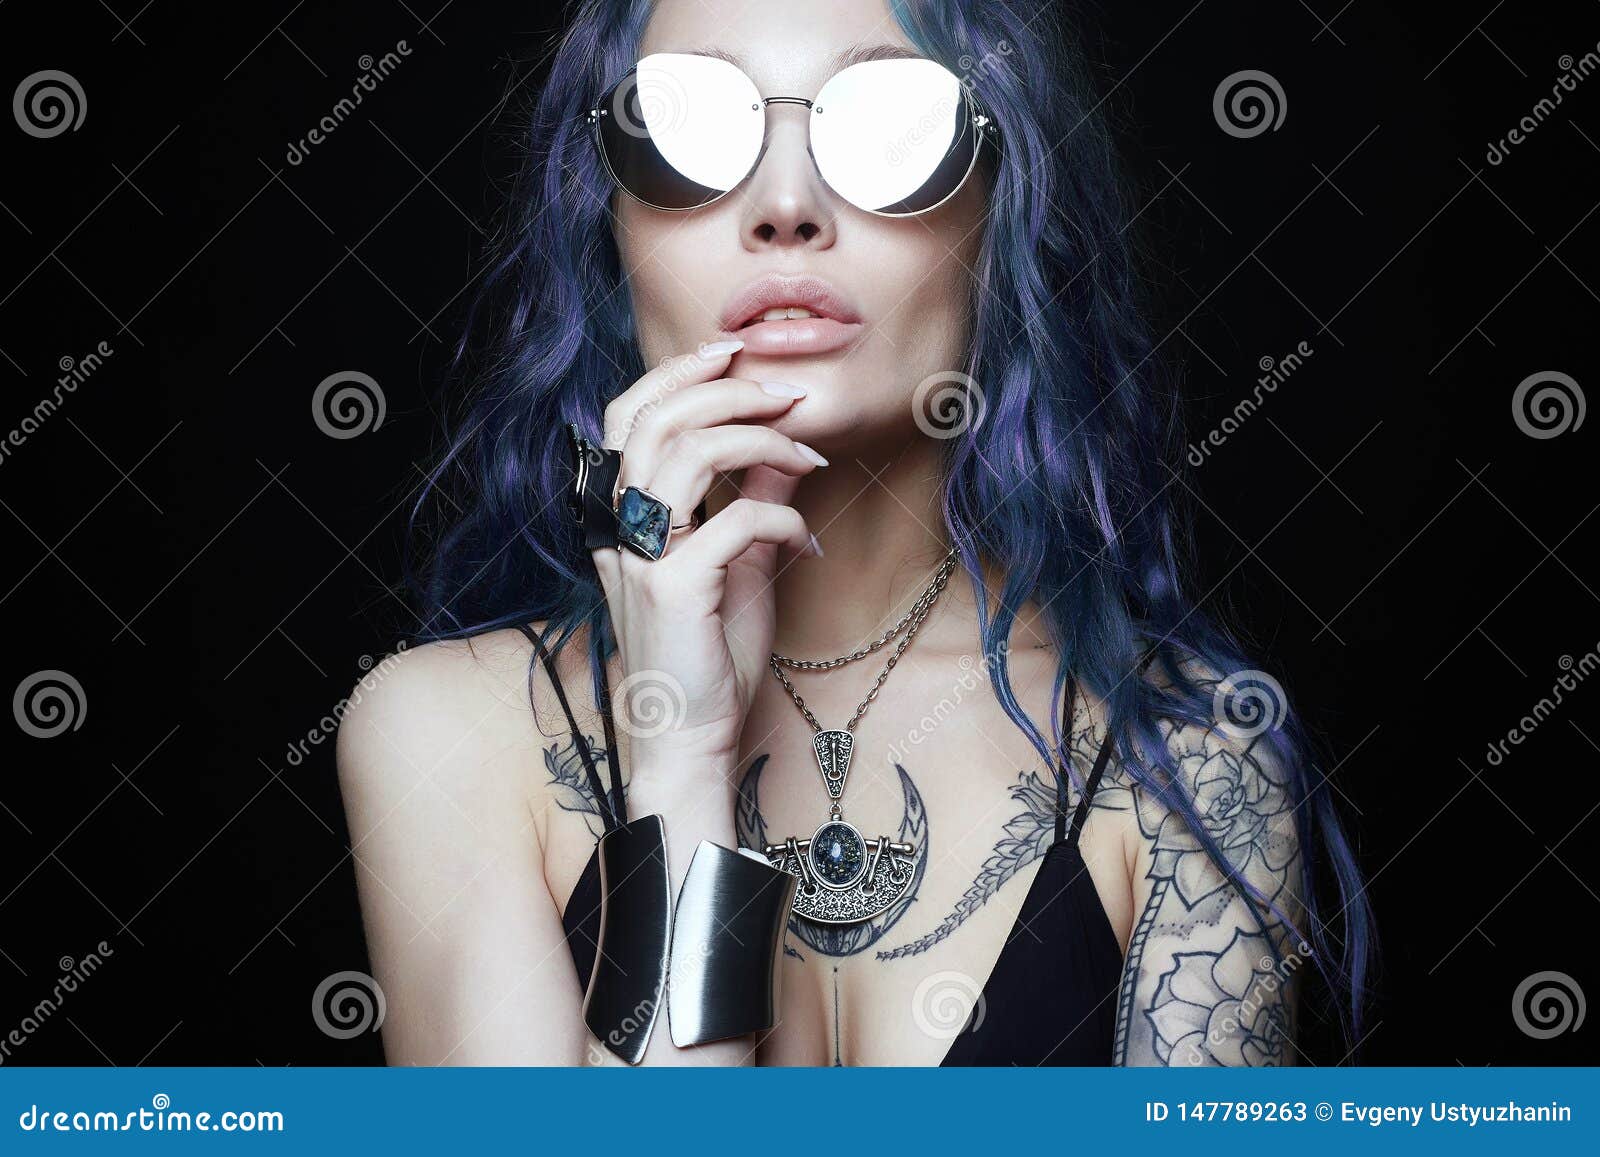 Blue hair tattoo HD - Getty Images - wide 2